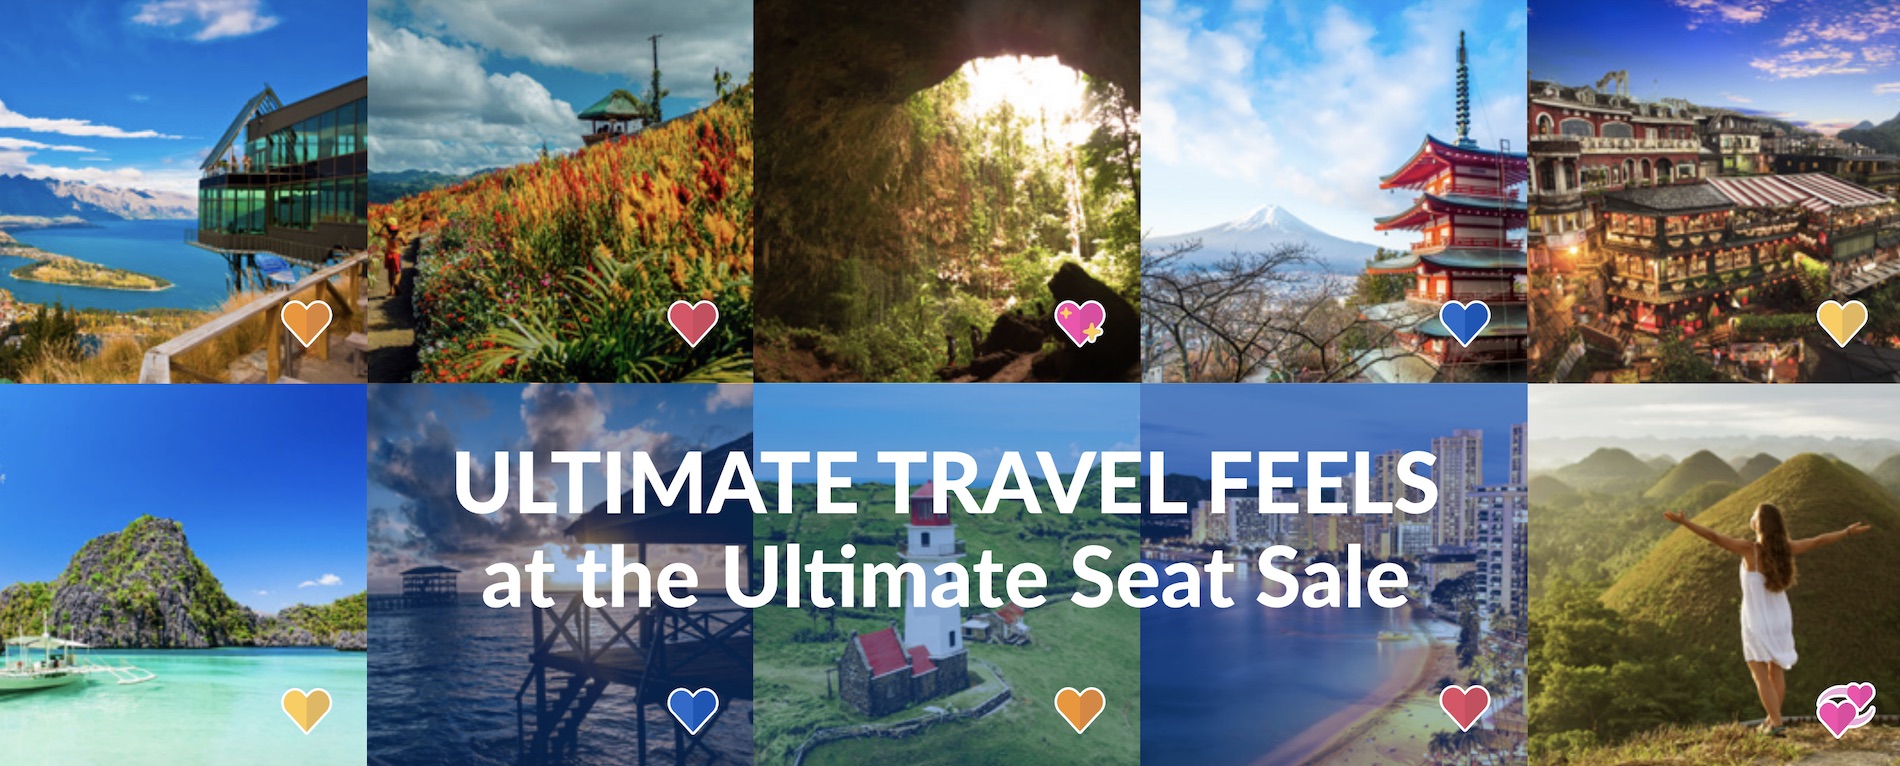 Vega Awards - Ultimate Travel Feels with the Ultimate Seat Sale